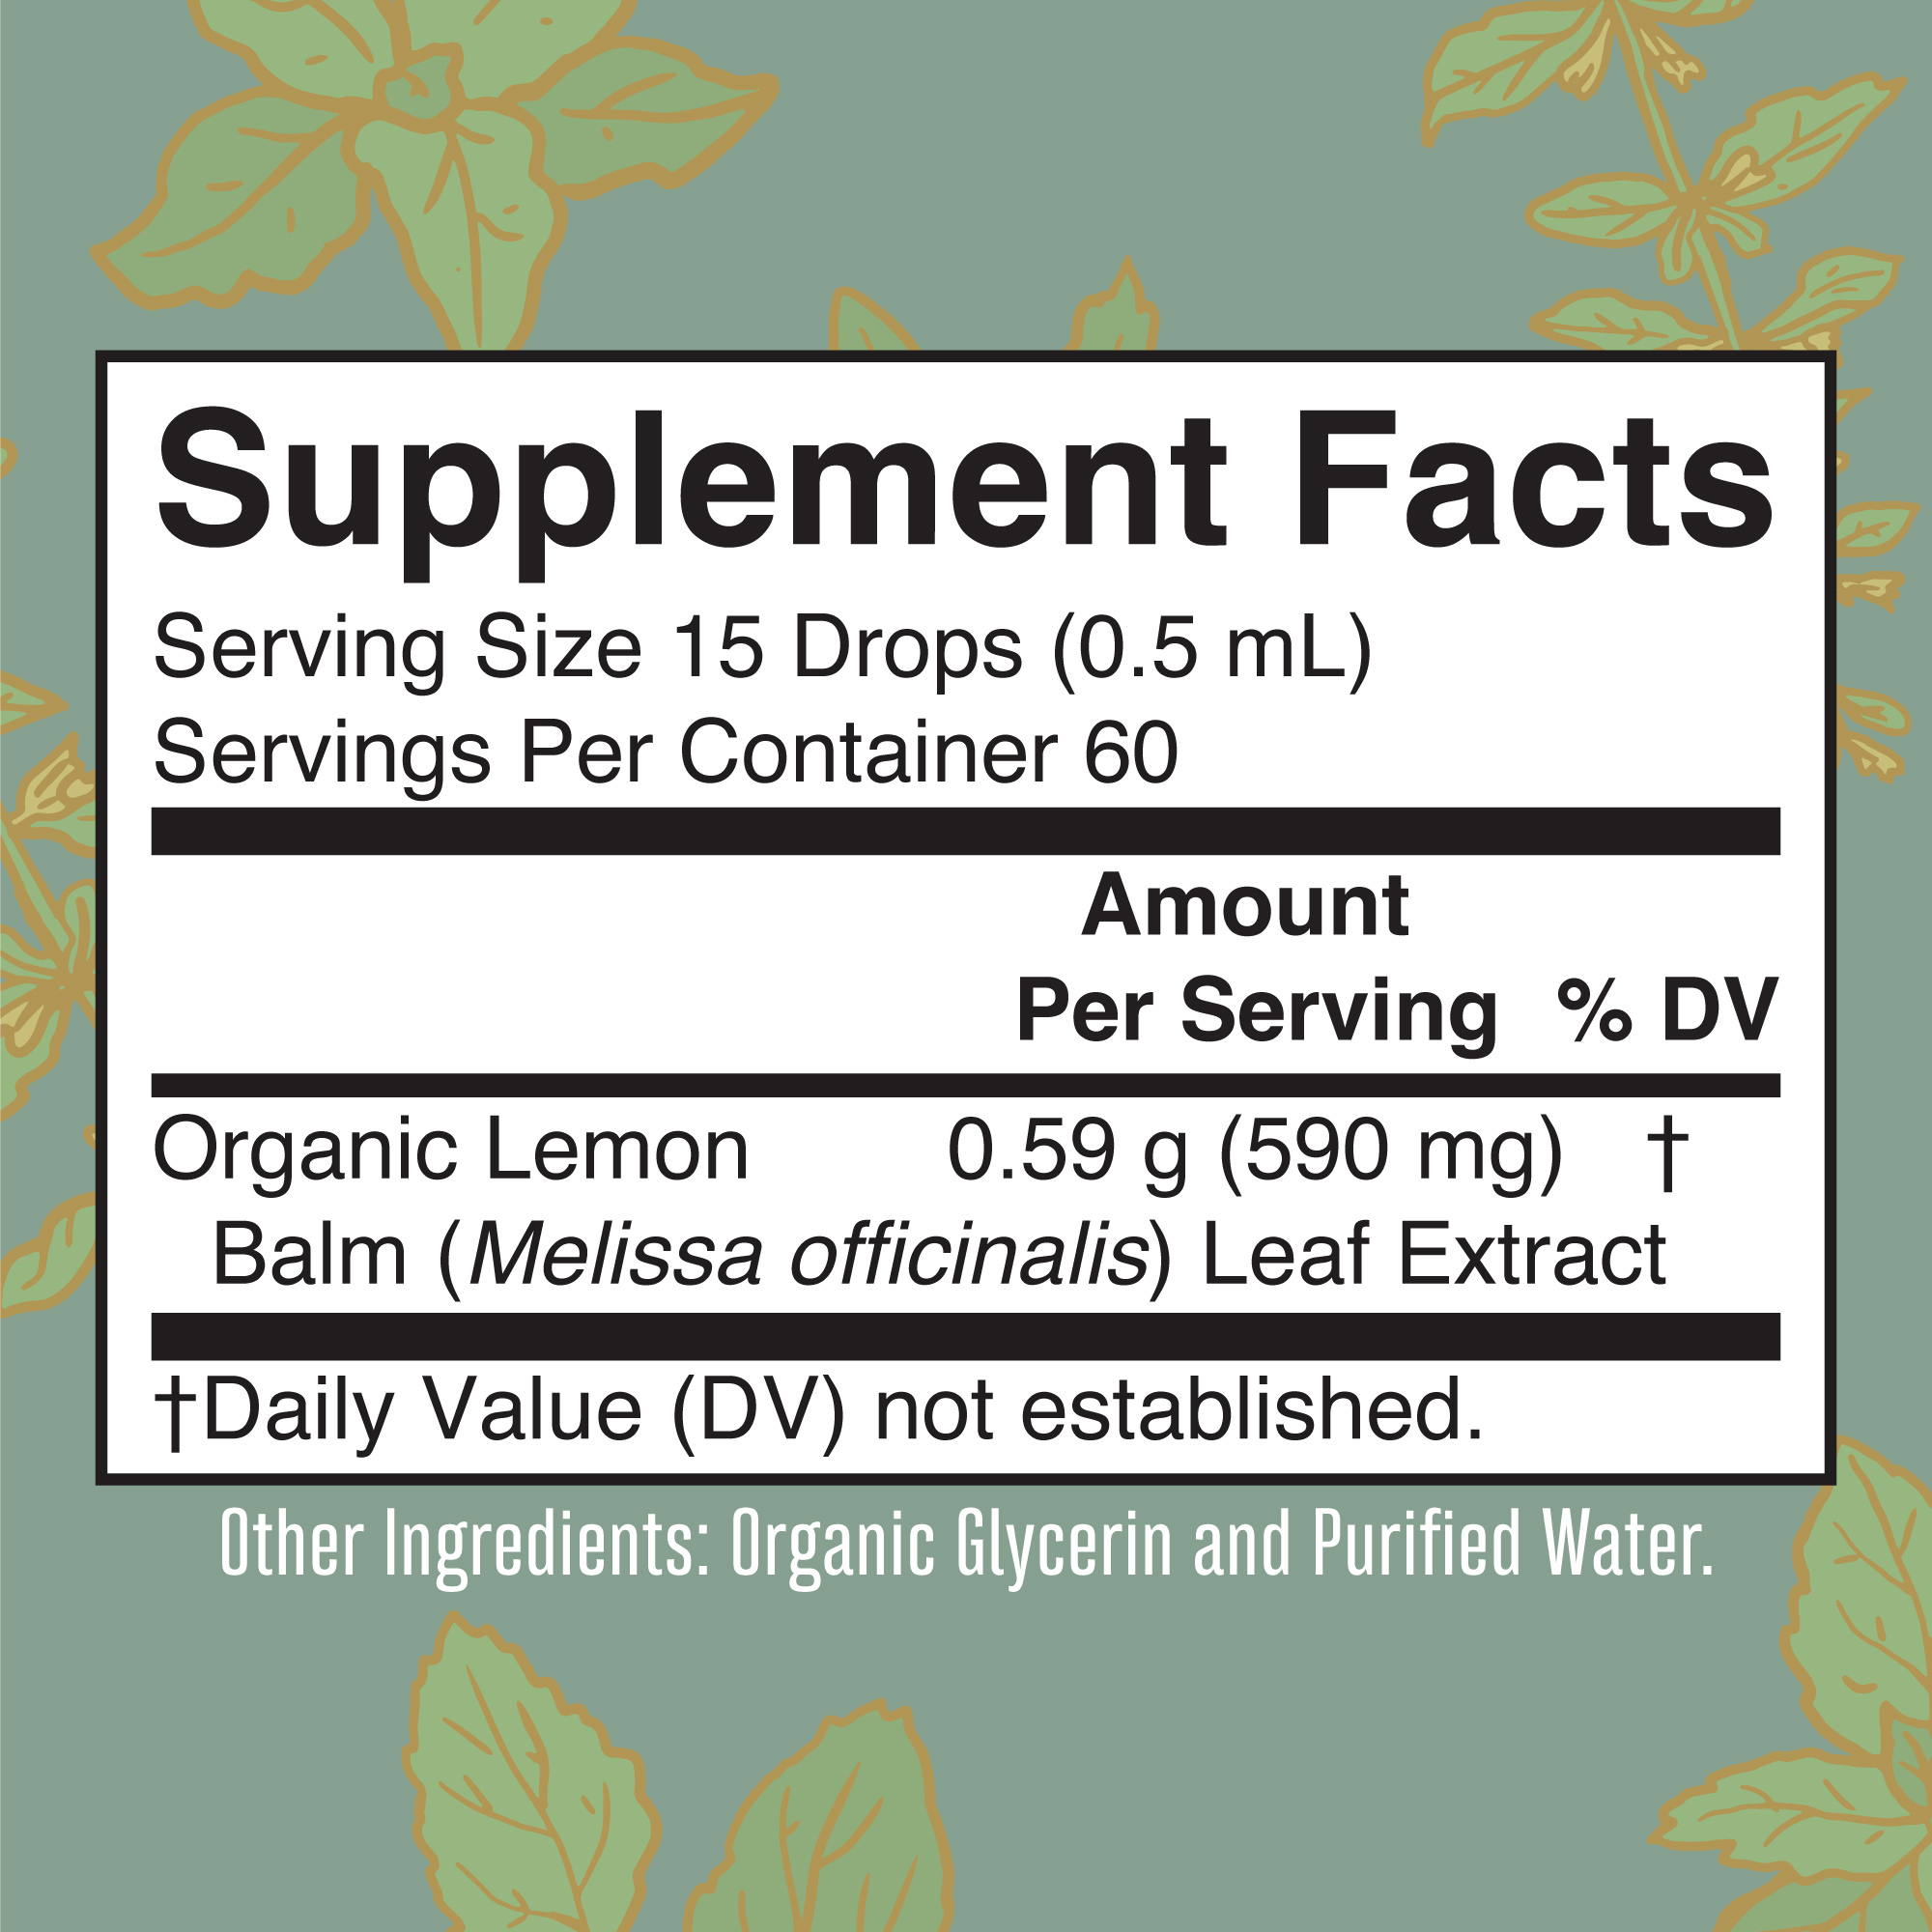 MaryRuth Organics | USDA Organic Lemon Balm Drops | Herbal Supplement for Calming & Cognitive Support | Vegan, Non-Gmo | 1 fl oz / 30ml | Clean Label Project Verified - image 3 of 8